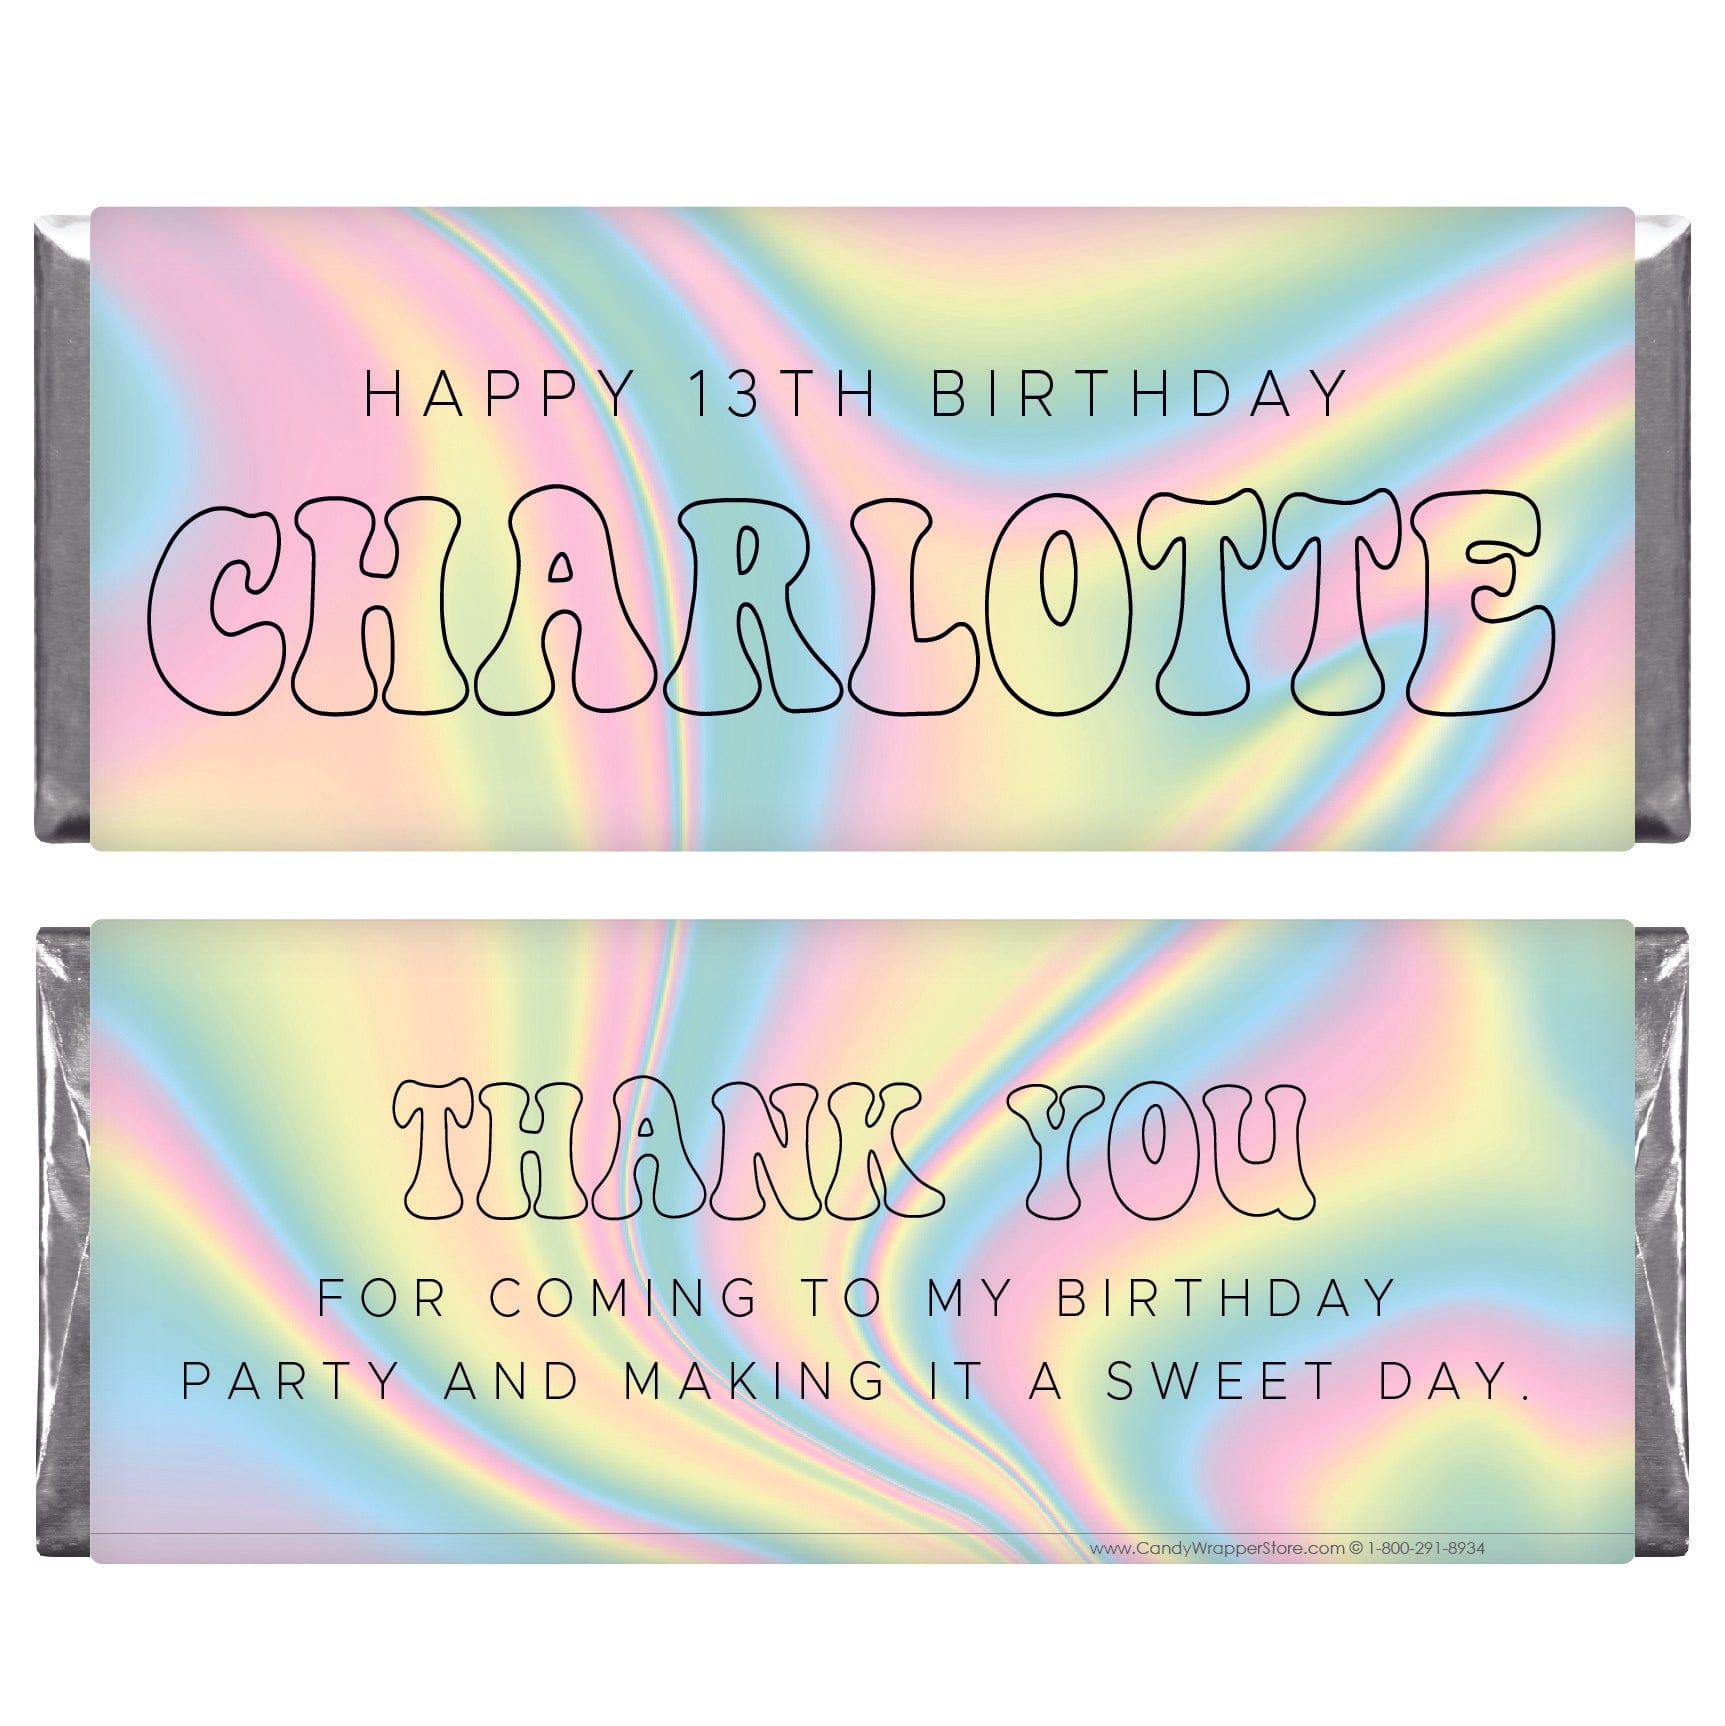 Holographic Iridescent Birthday Candy Bar Wrapper - BD521 Nightmare Before Christmas Birthday Personalized Candy Bar Wrapper Candy Wrappers BD520